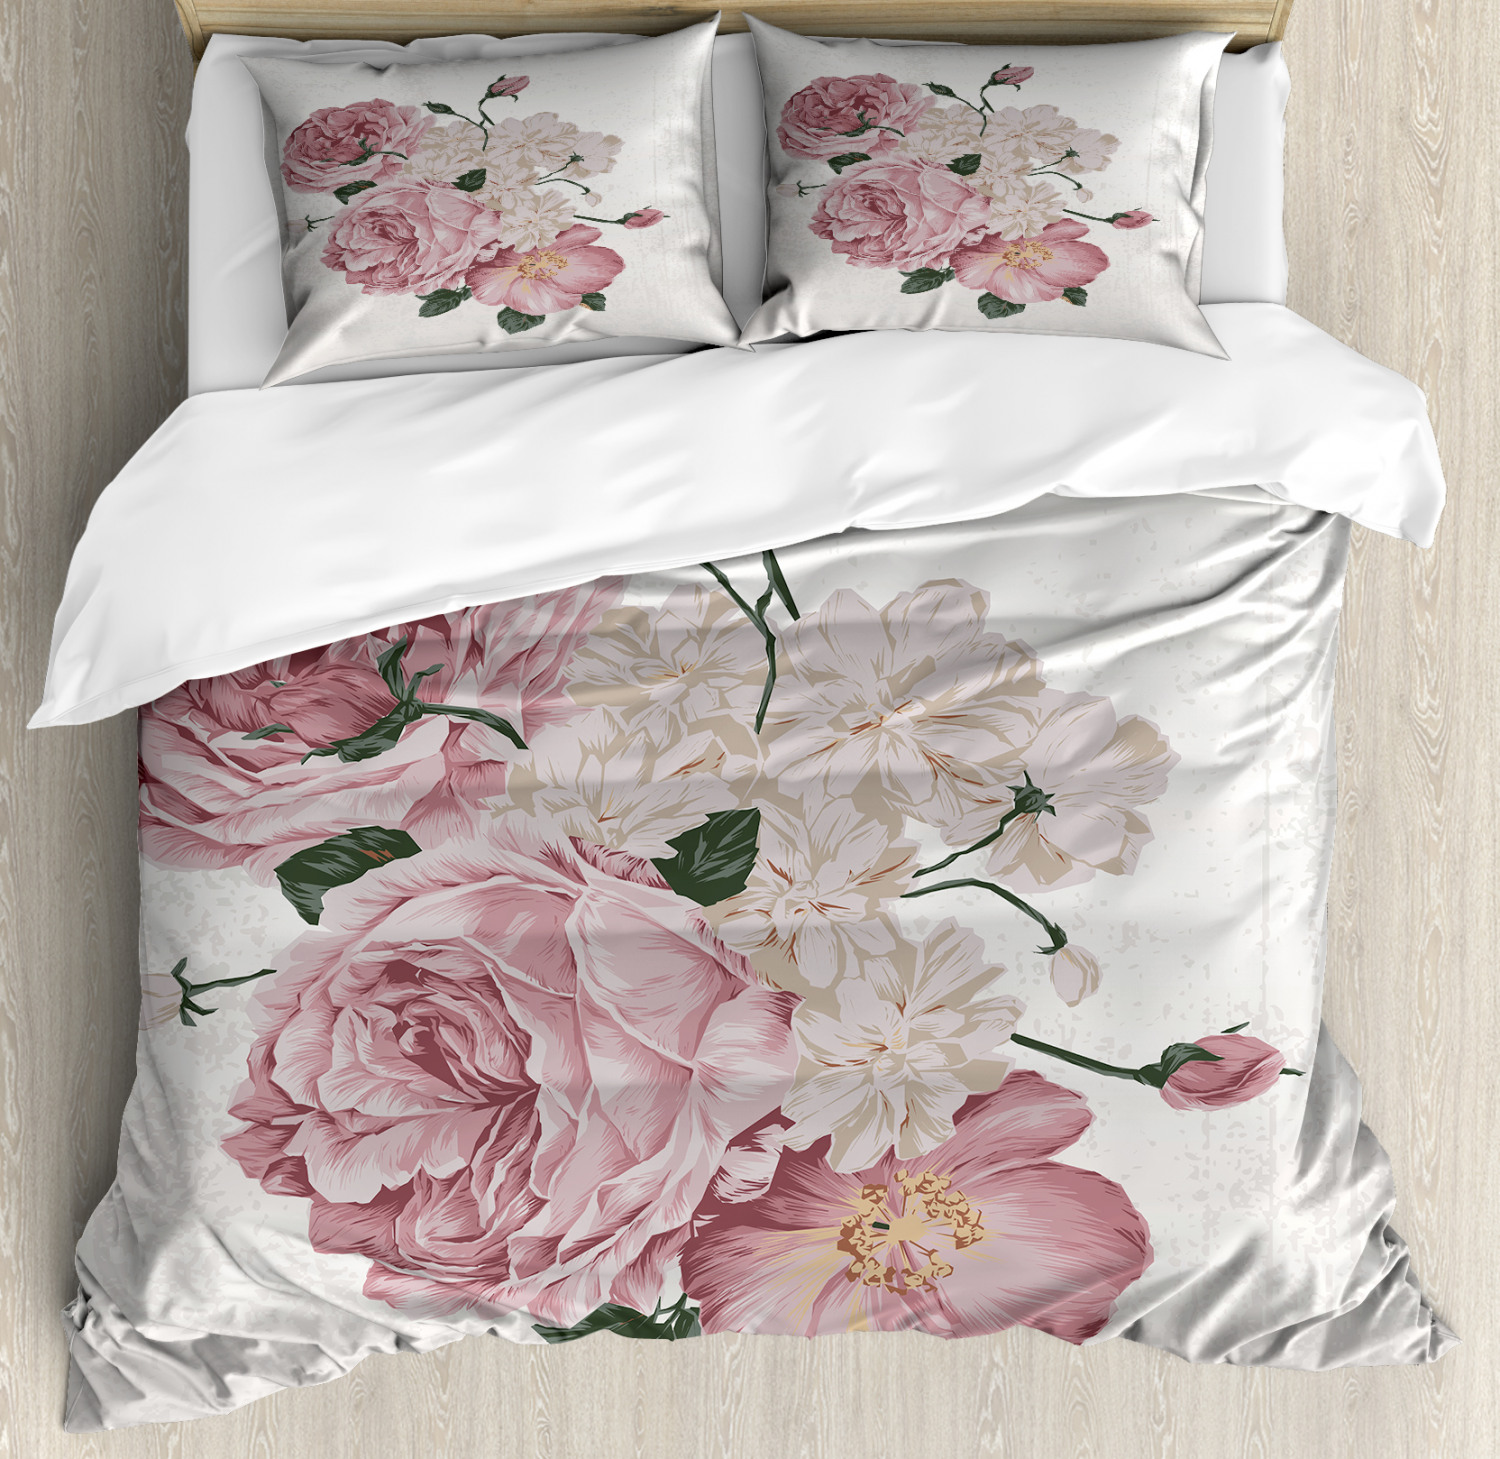 Rose Duvet Cover Set with Pillow Shams Old Roses Corsage Grunge Print ...